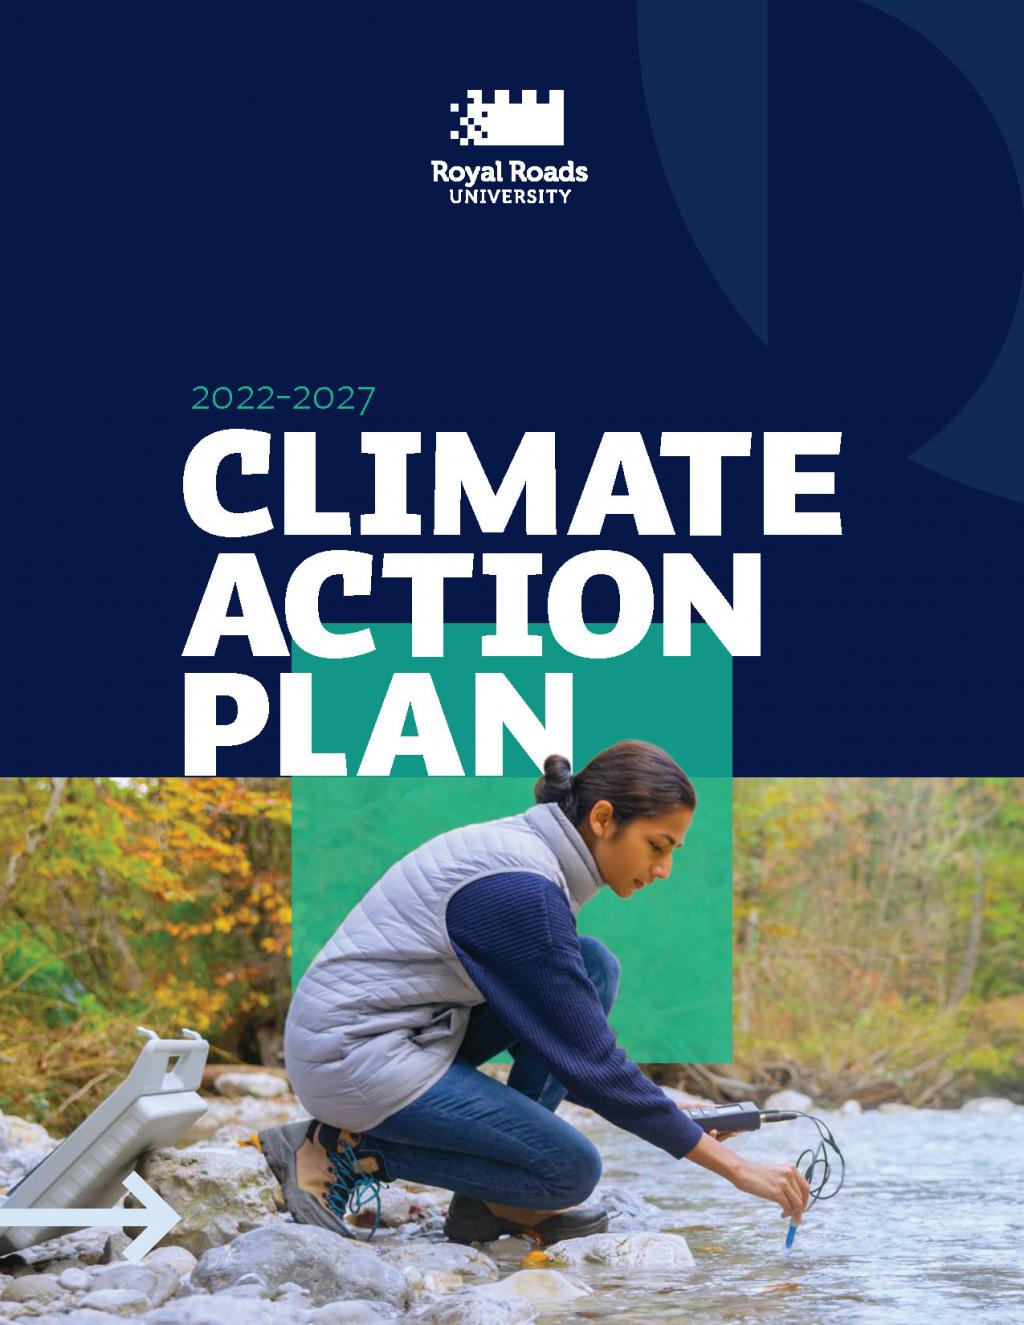 The front cover of the Climate Action Plan.